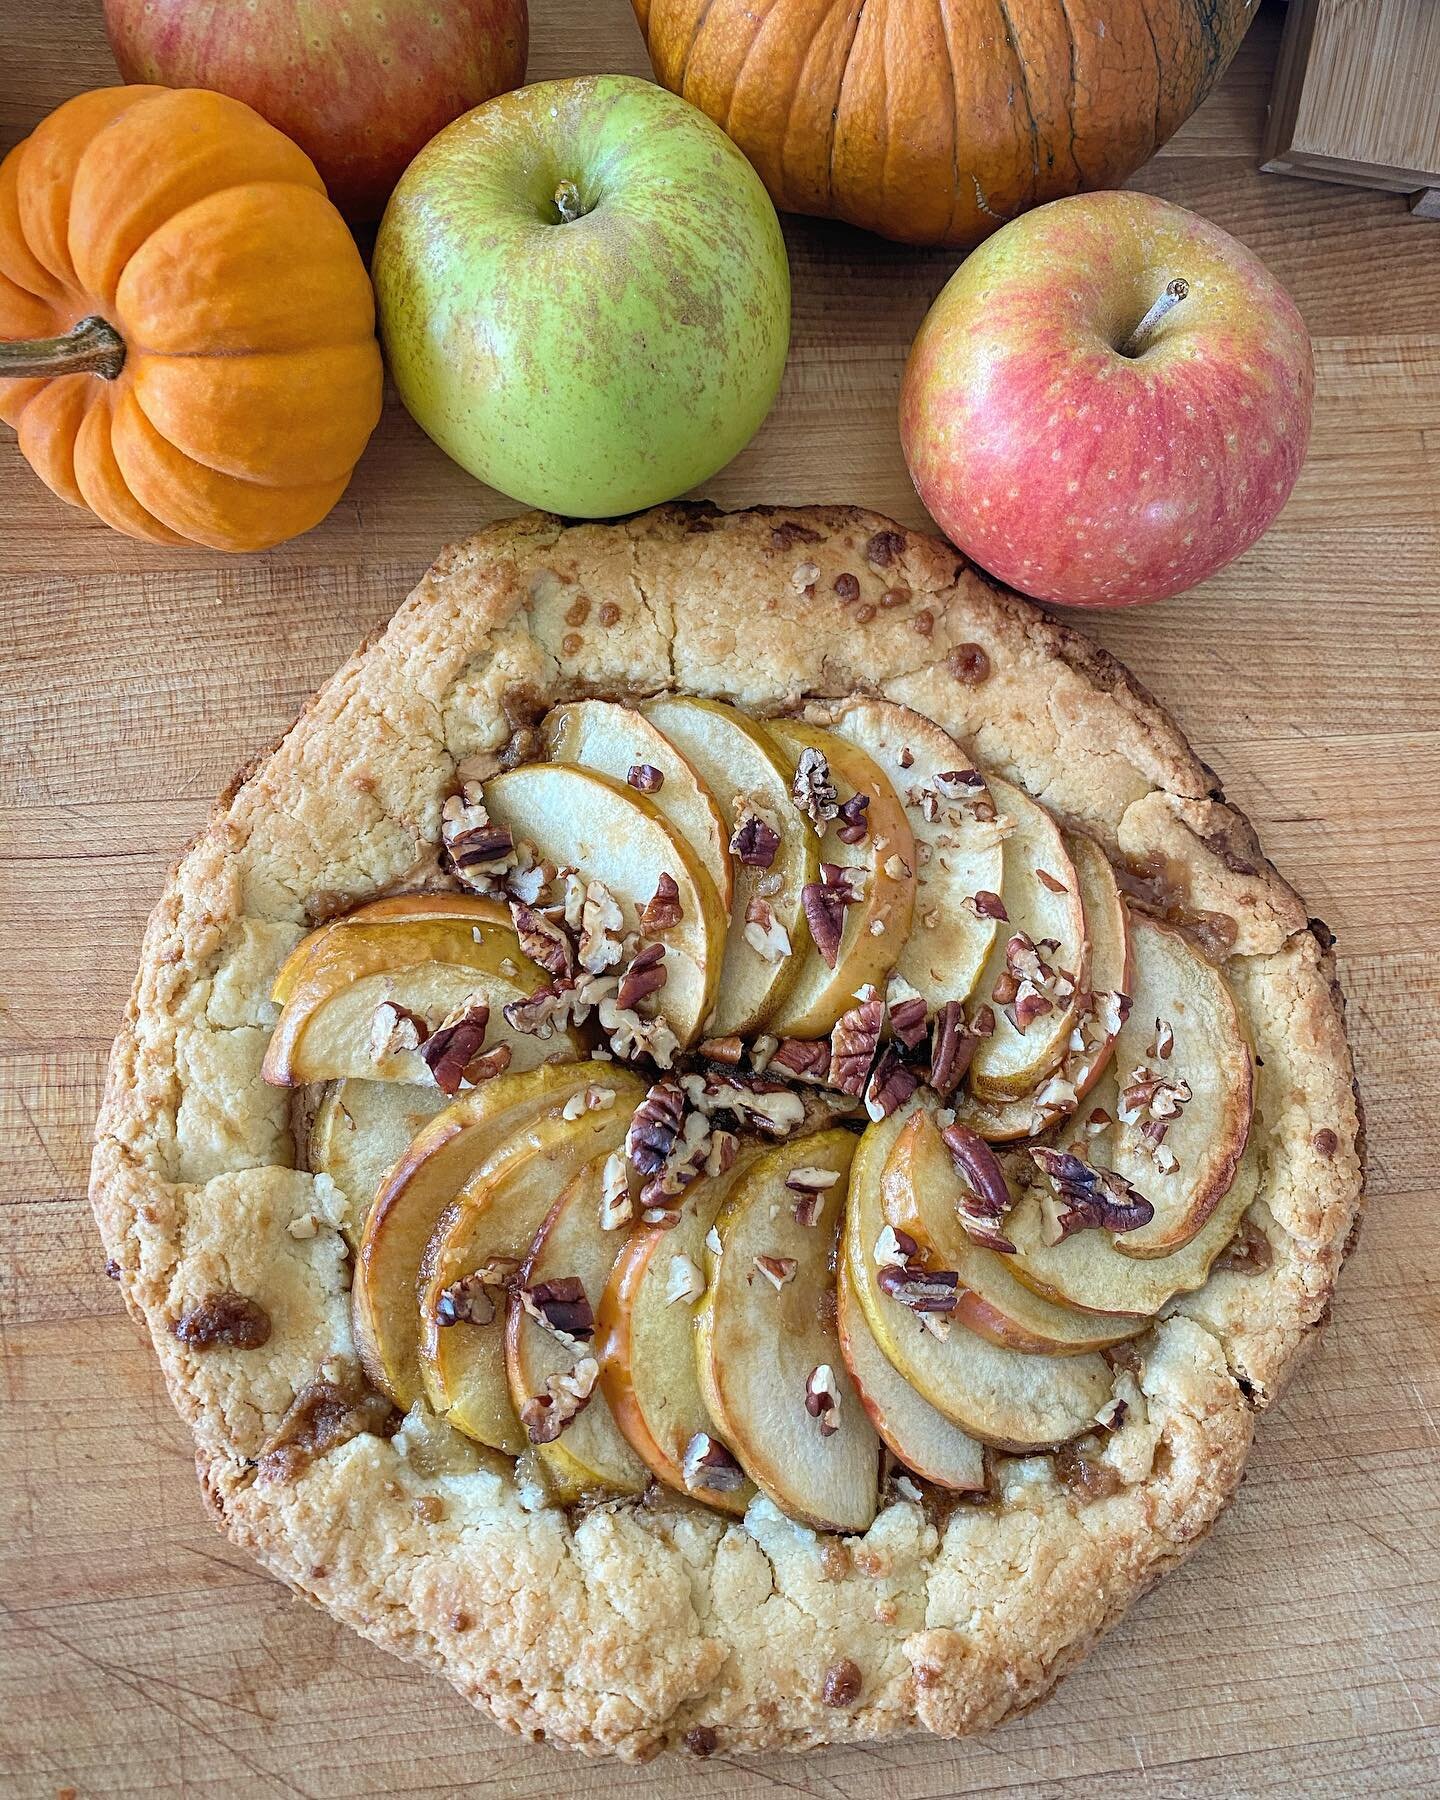 Happy fall to all! 🍁We had to get in some celebratory baking featuring Ashmead&rsquo;s Kernel and Golden Russet plucked straight from the orchard. Who else is ready for all the apple inspired desserts?! 😃🙋🏻&zwj;♀️🍎 

#itsfallyall #applegalette #